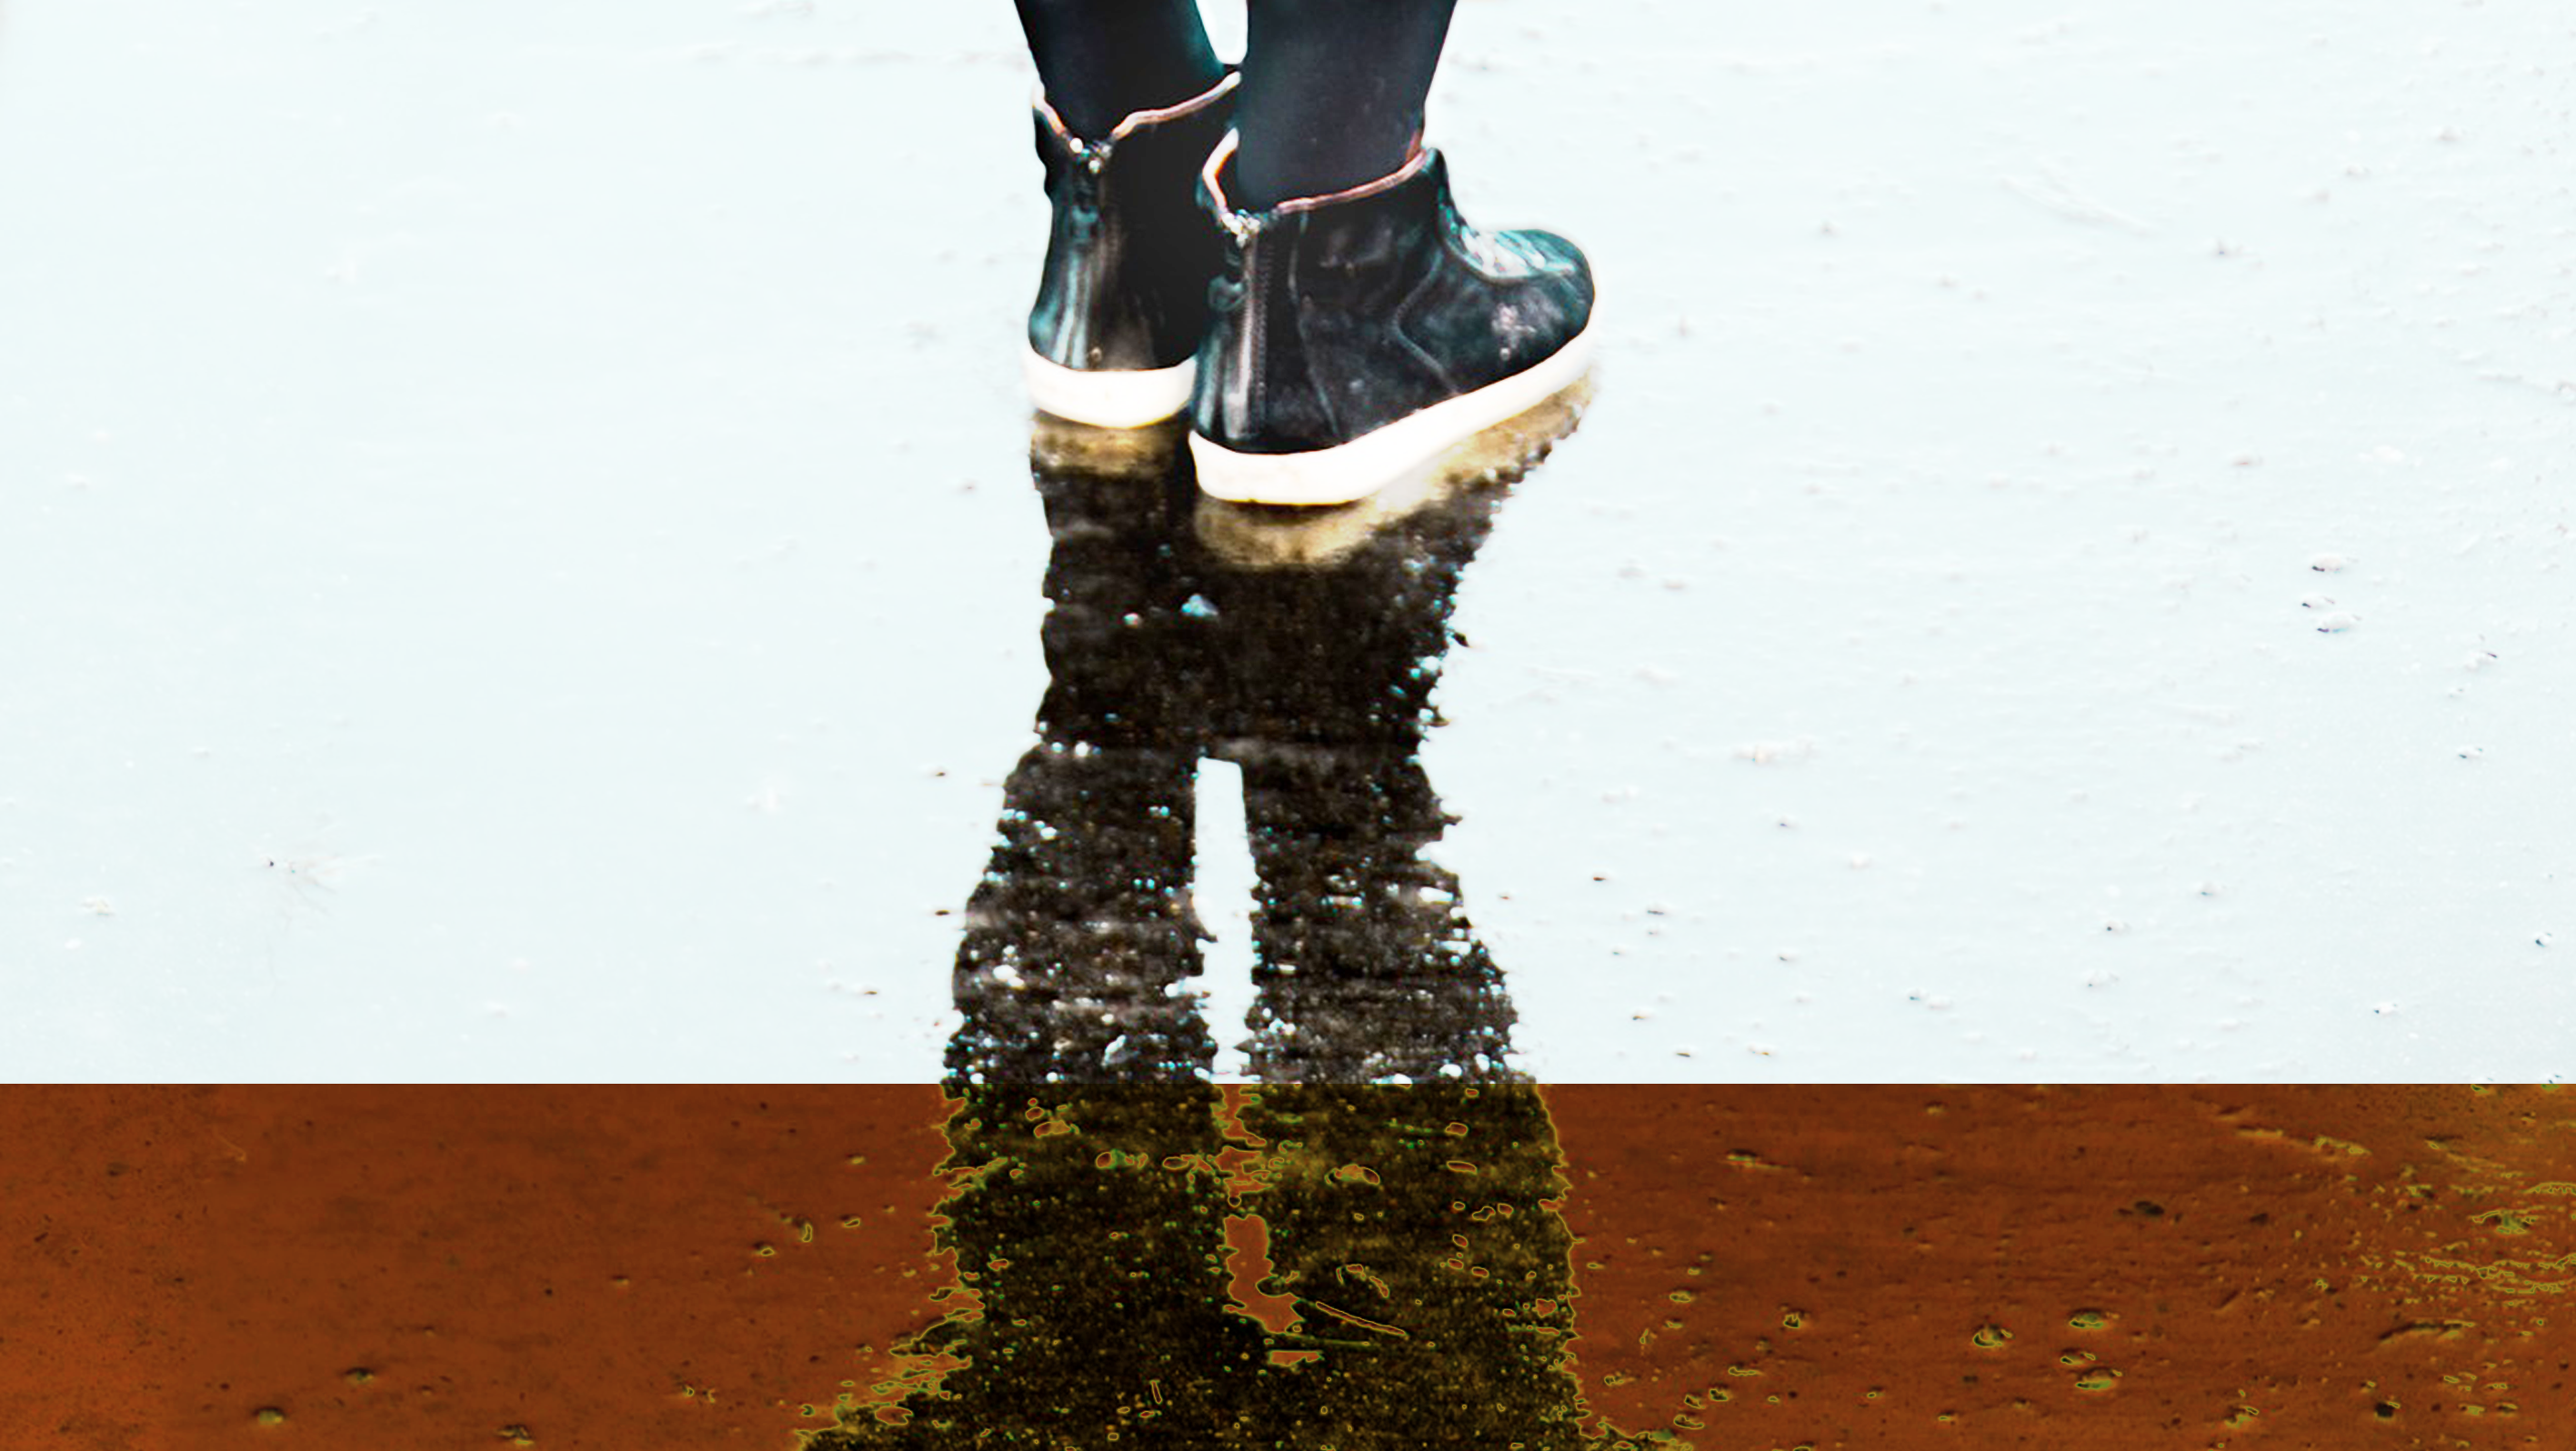 Illustration shows the reflection of a person wearing rainboots, on a white and maroon background.